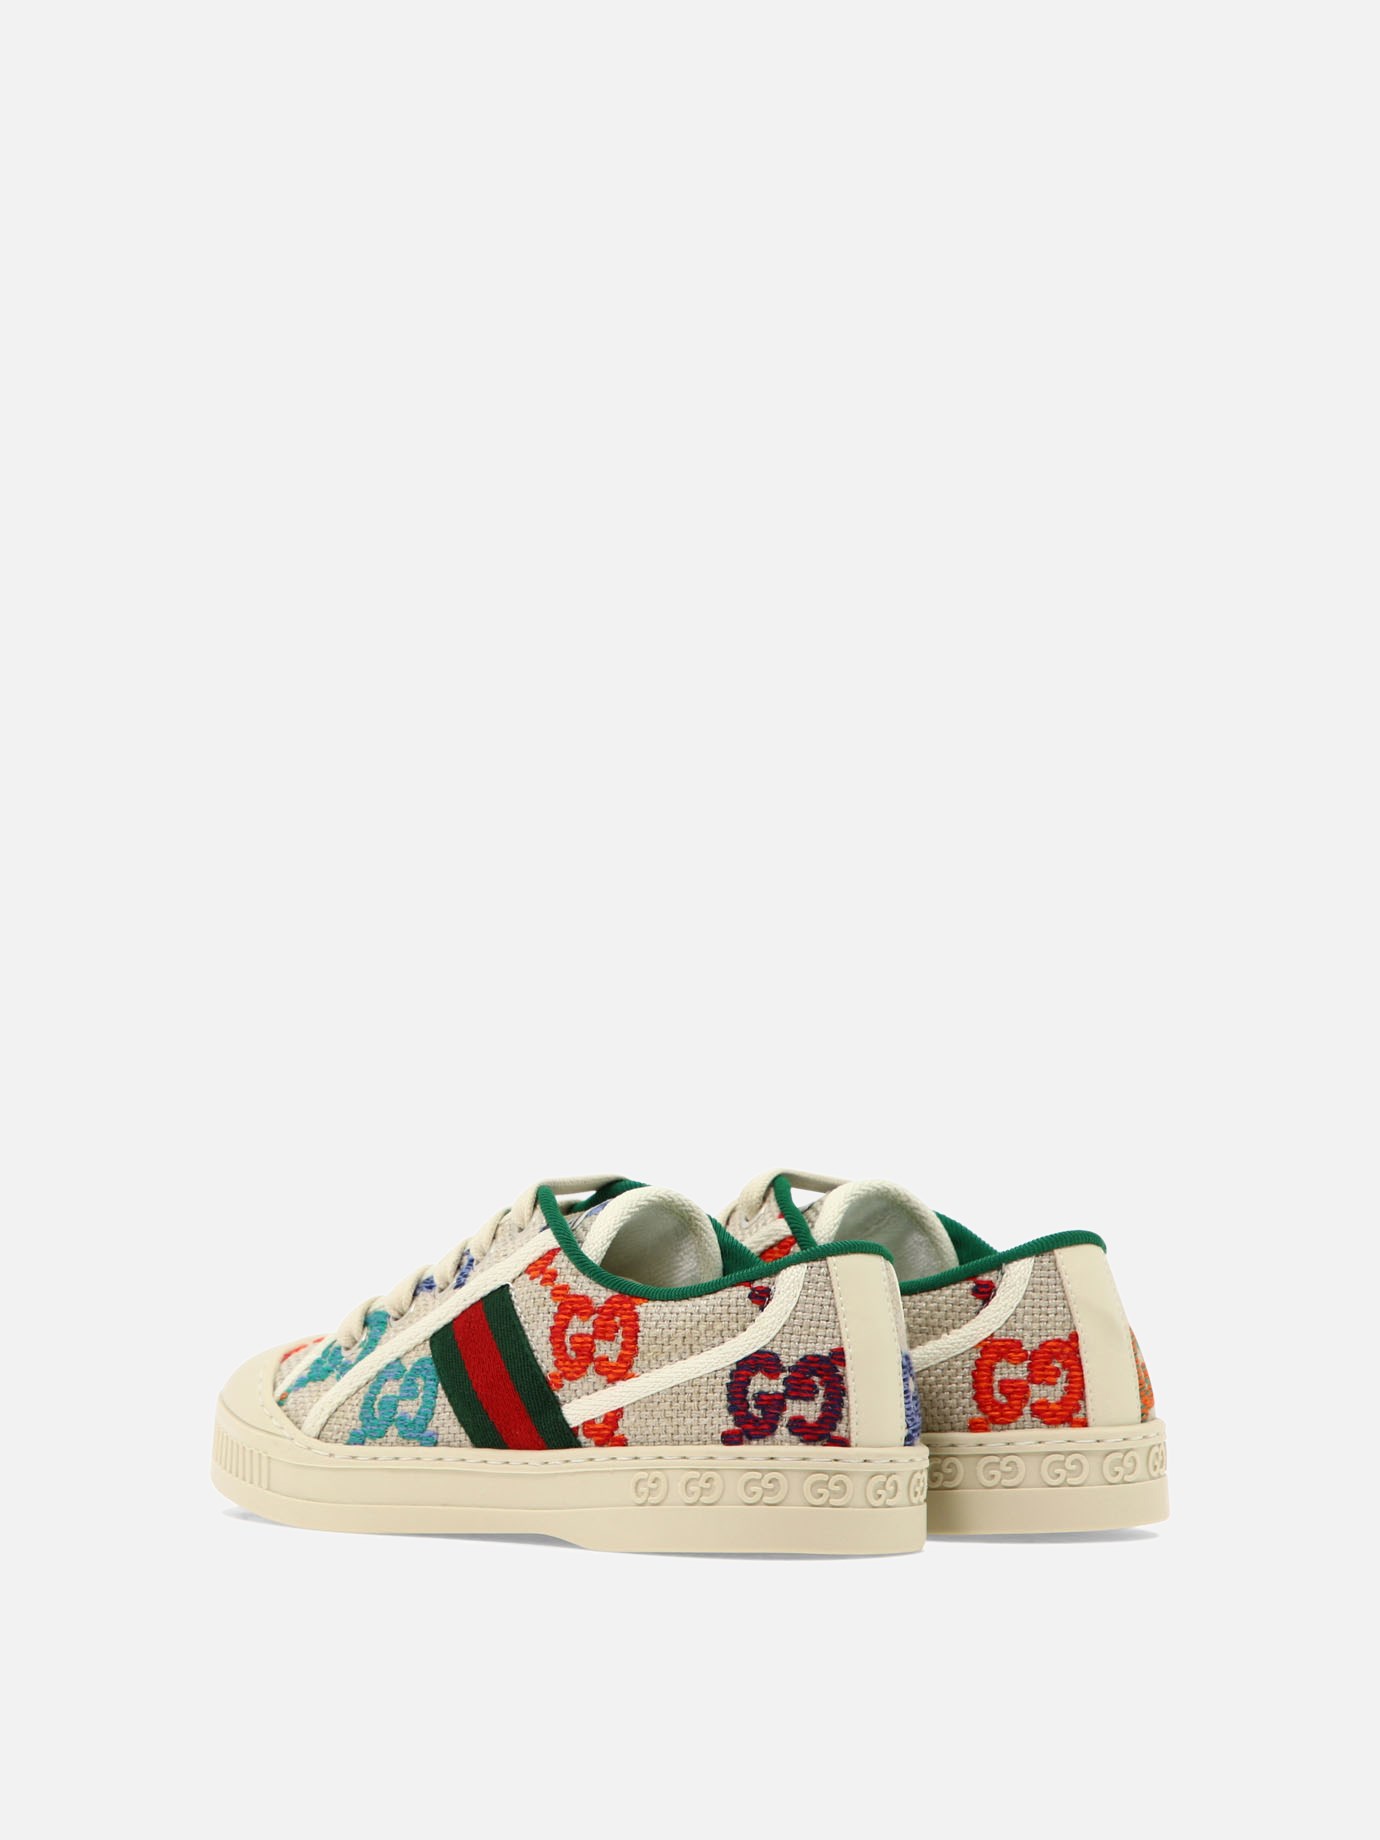  Tennis 1977  sneakers by Gucci Kids